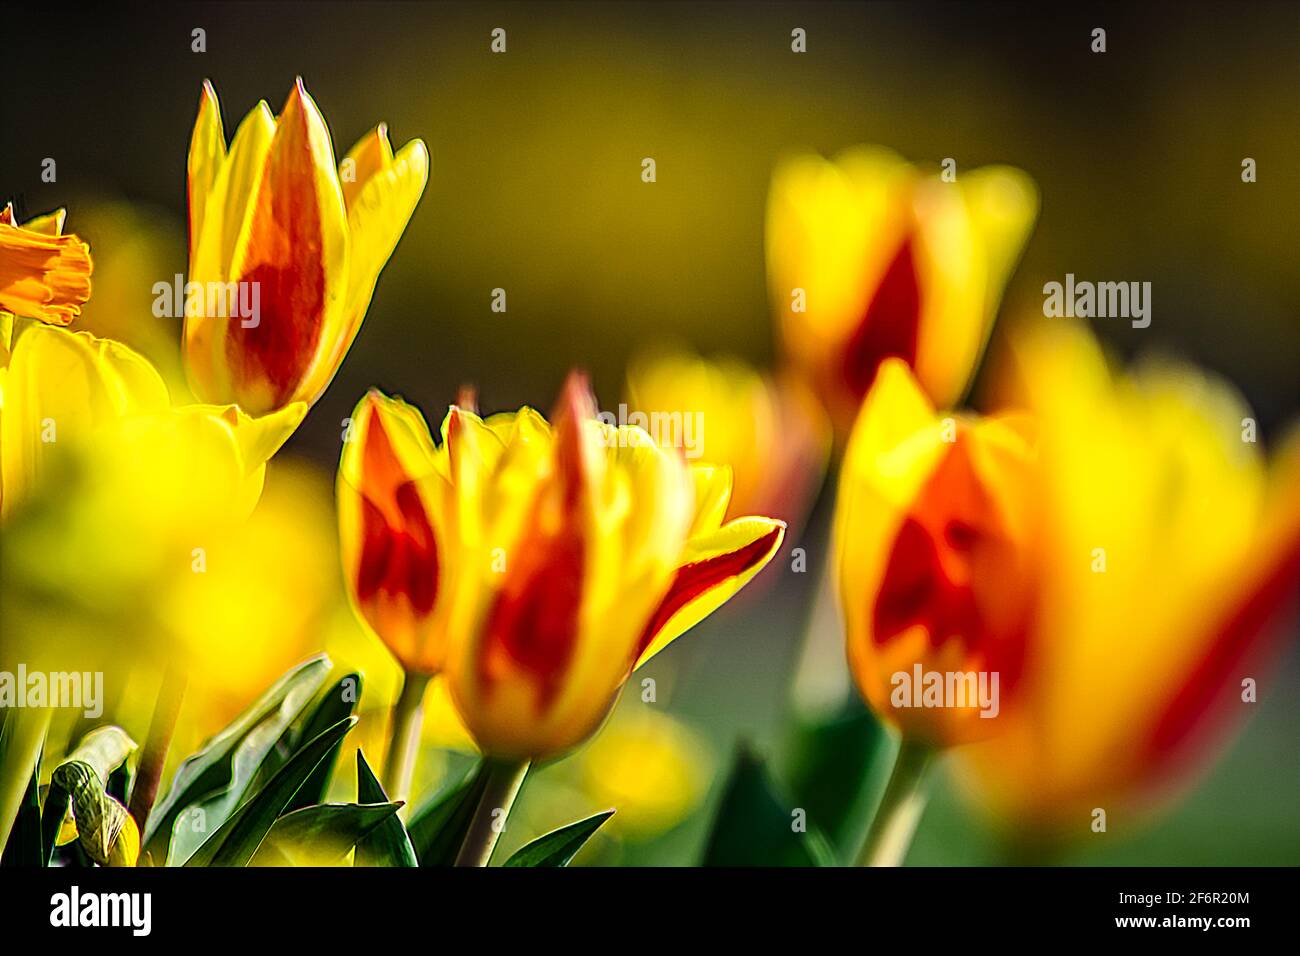 Floral : Times of tulips Stock Photo